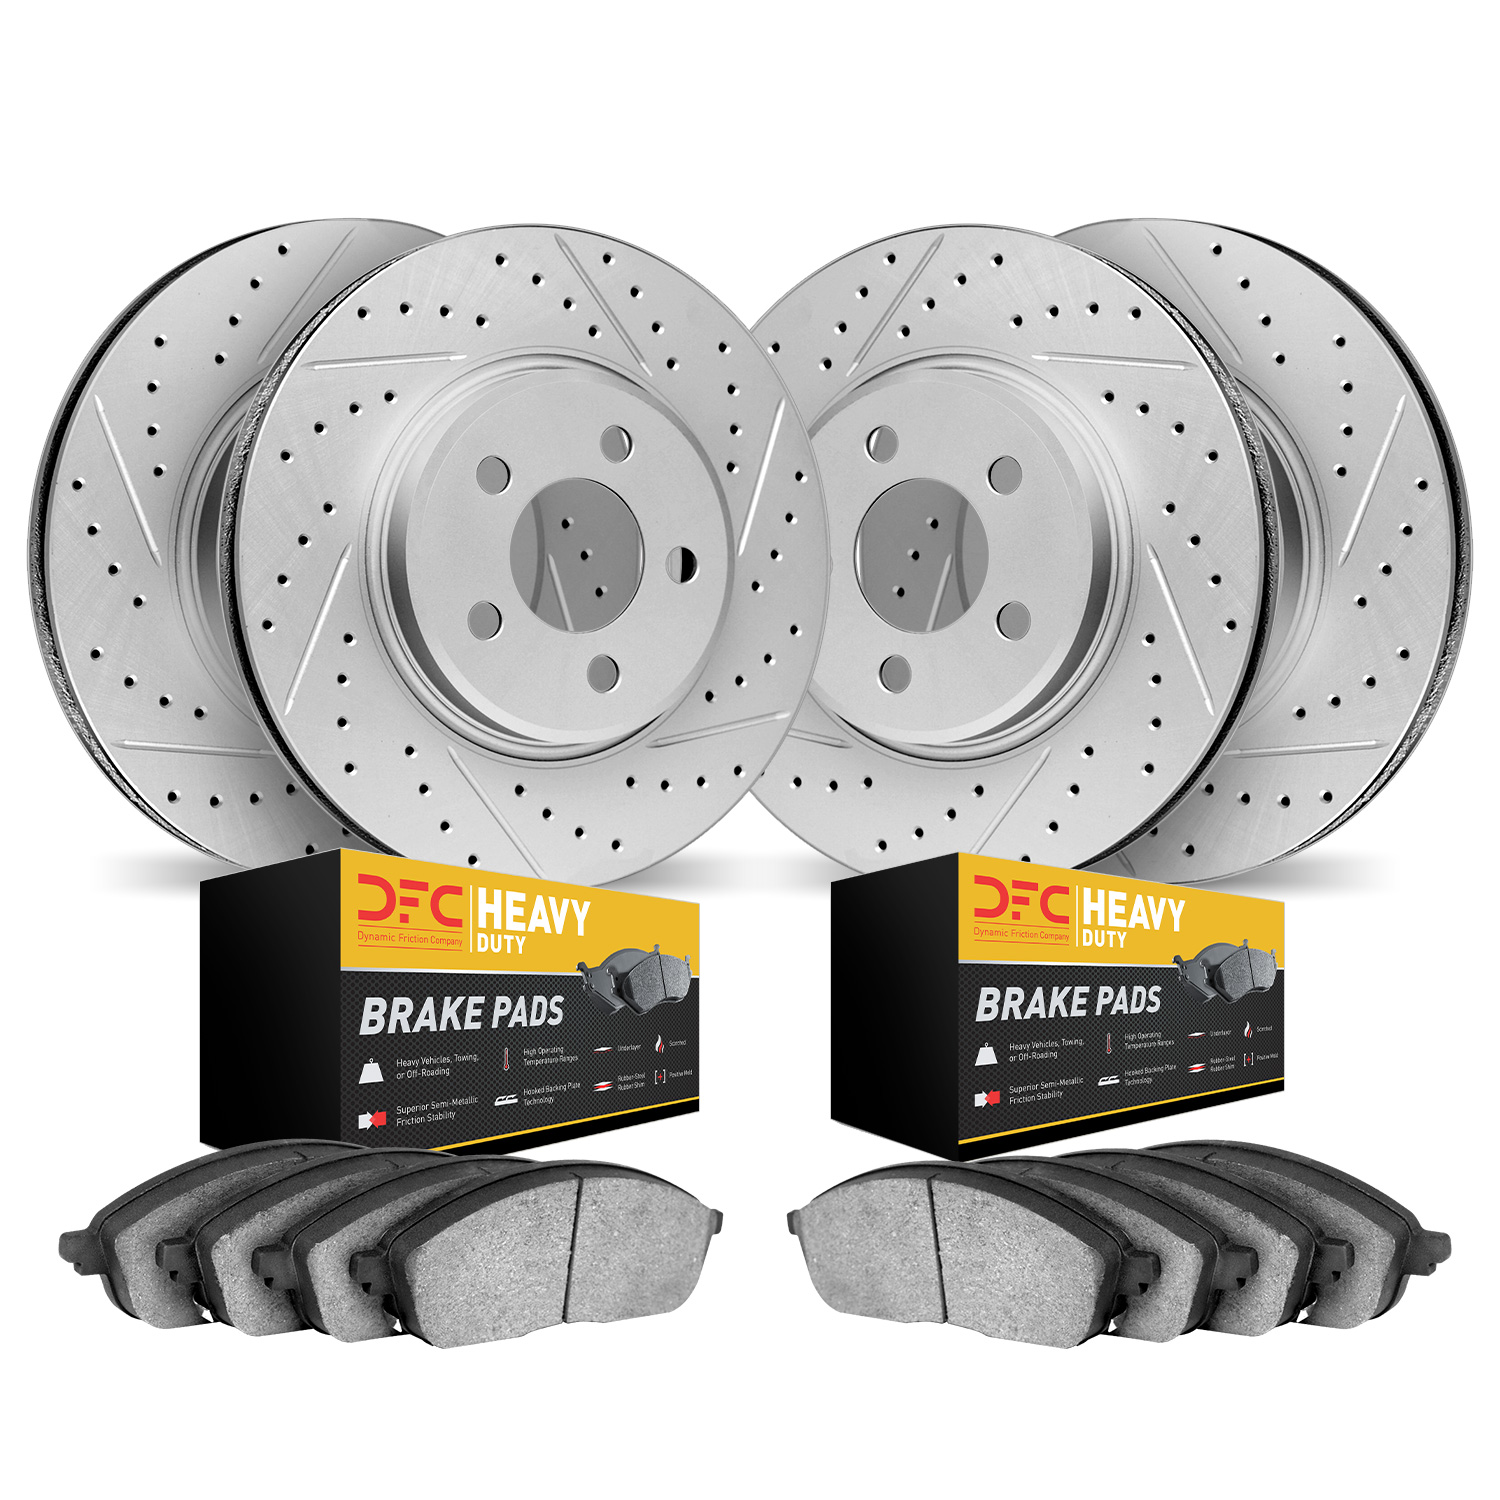 2204-76007 Geoperformance Drilled/Slotted Rotors w/Heavy-Duty Pads Kit, 2008-2021 Lexus/Toyota/Scion, Position: Front and Rear